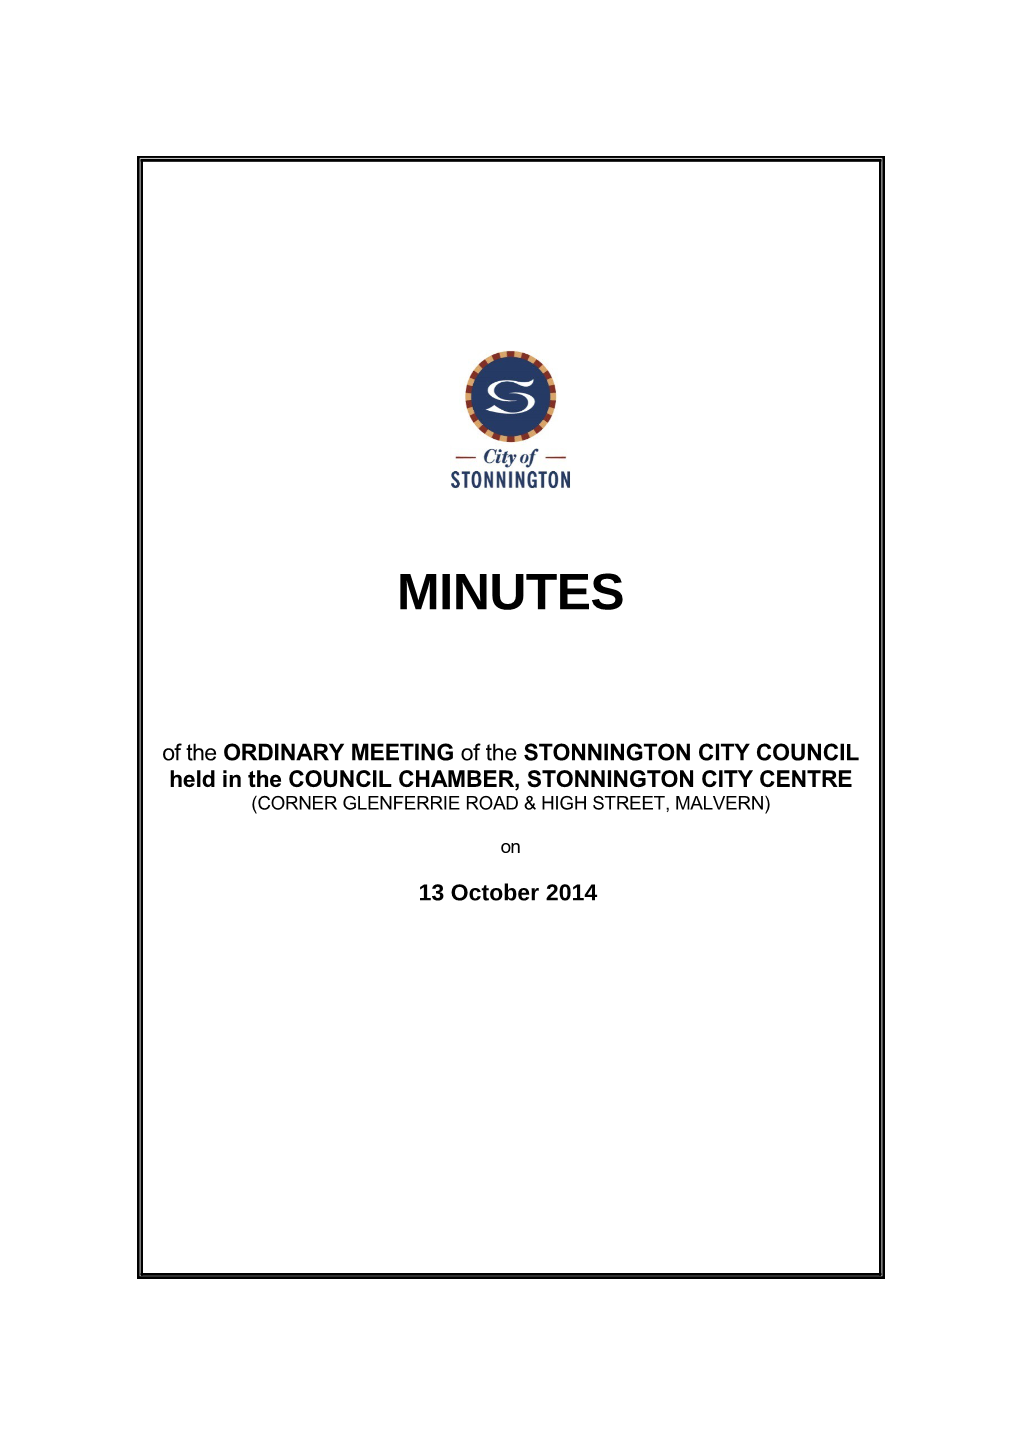 Minutes of Council Meeting - 13 October 2014